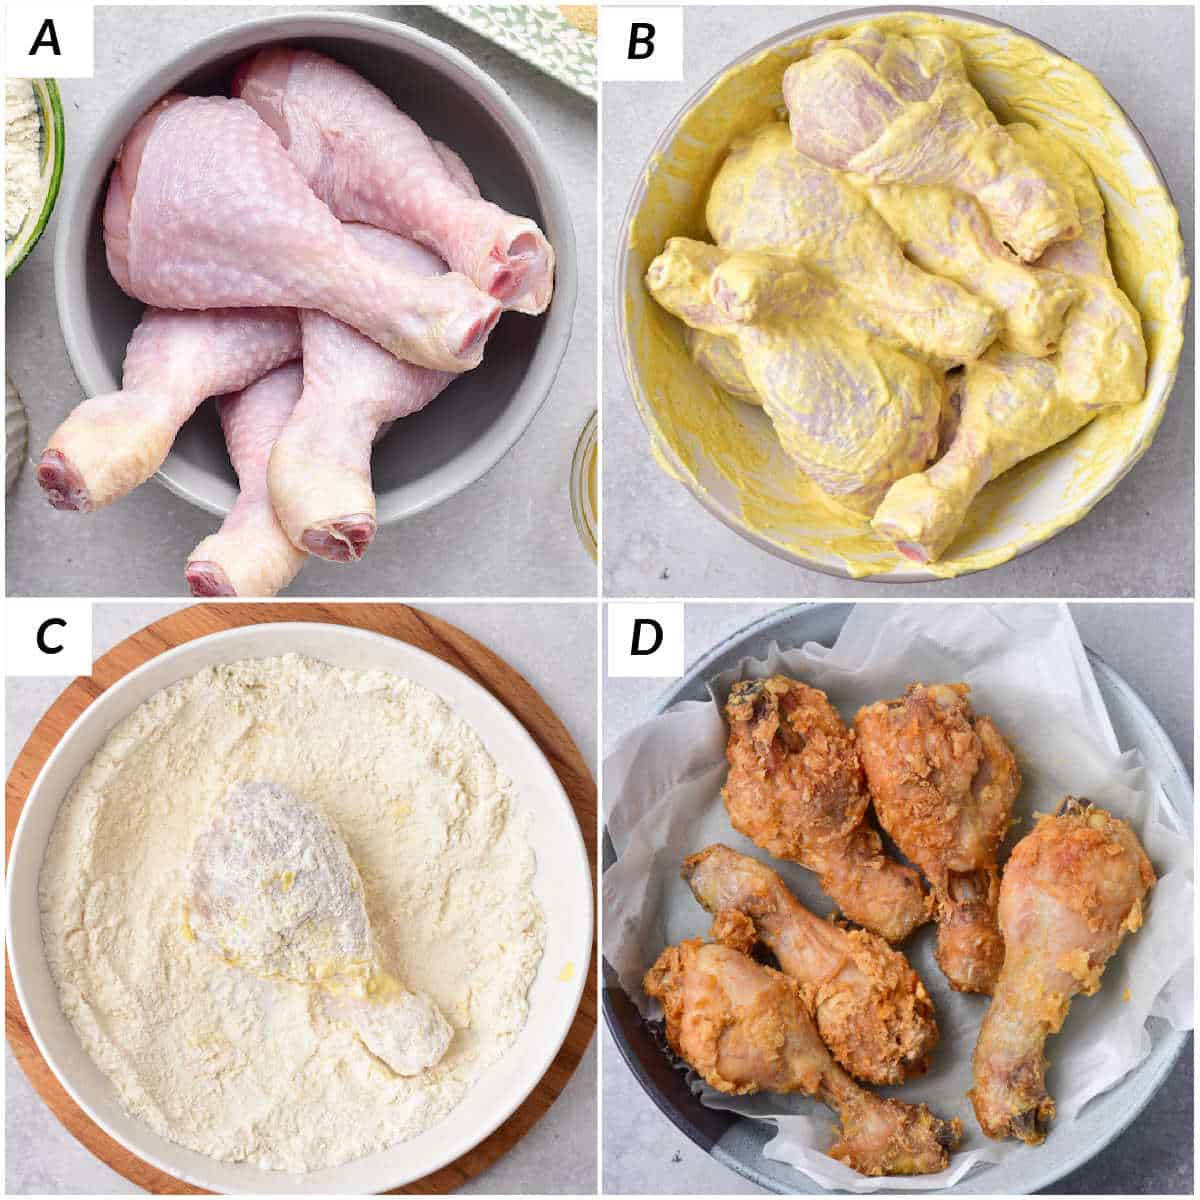 image collage showing the steps for making fried chicken legs